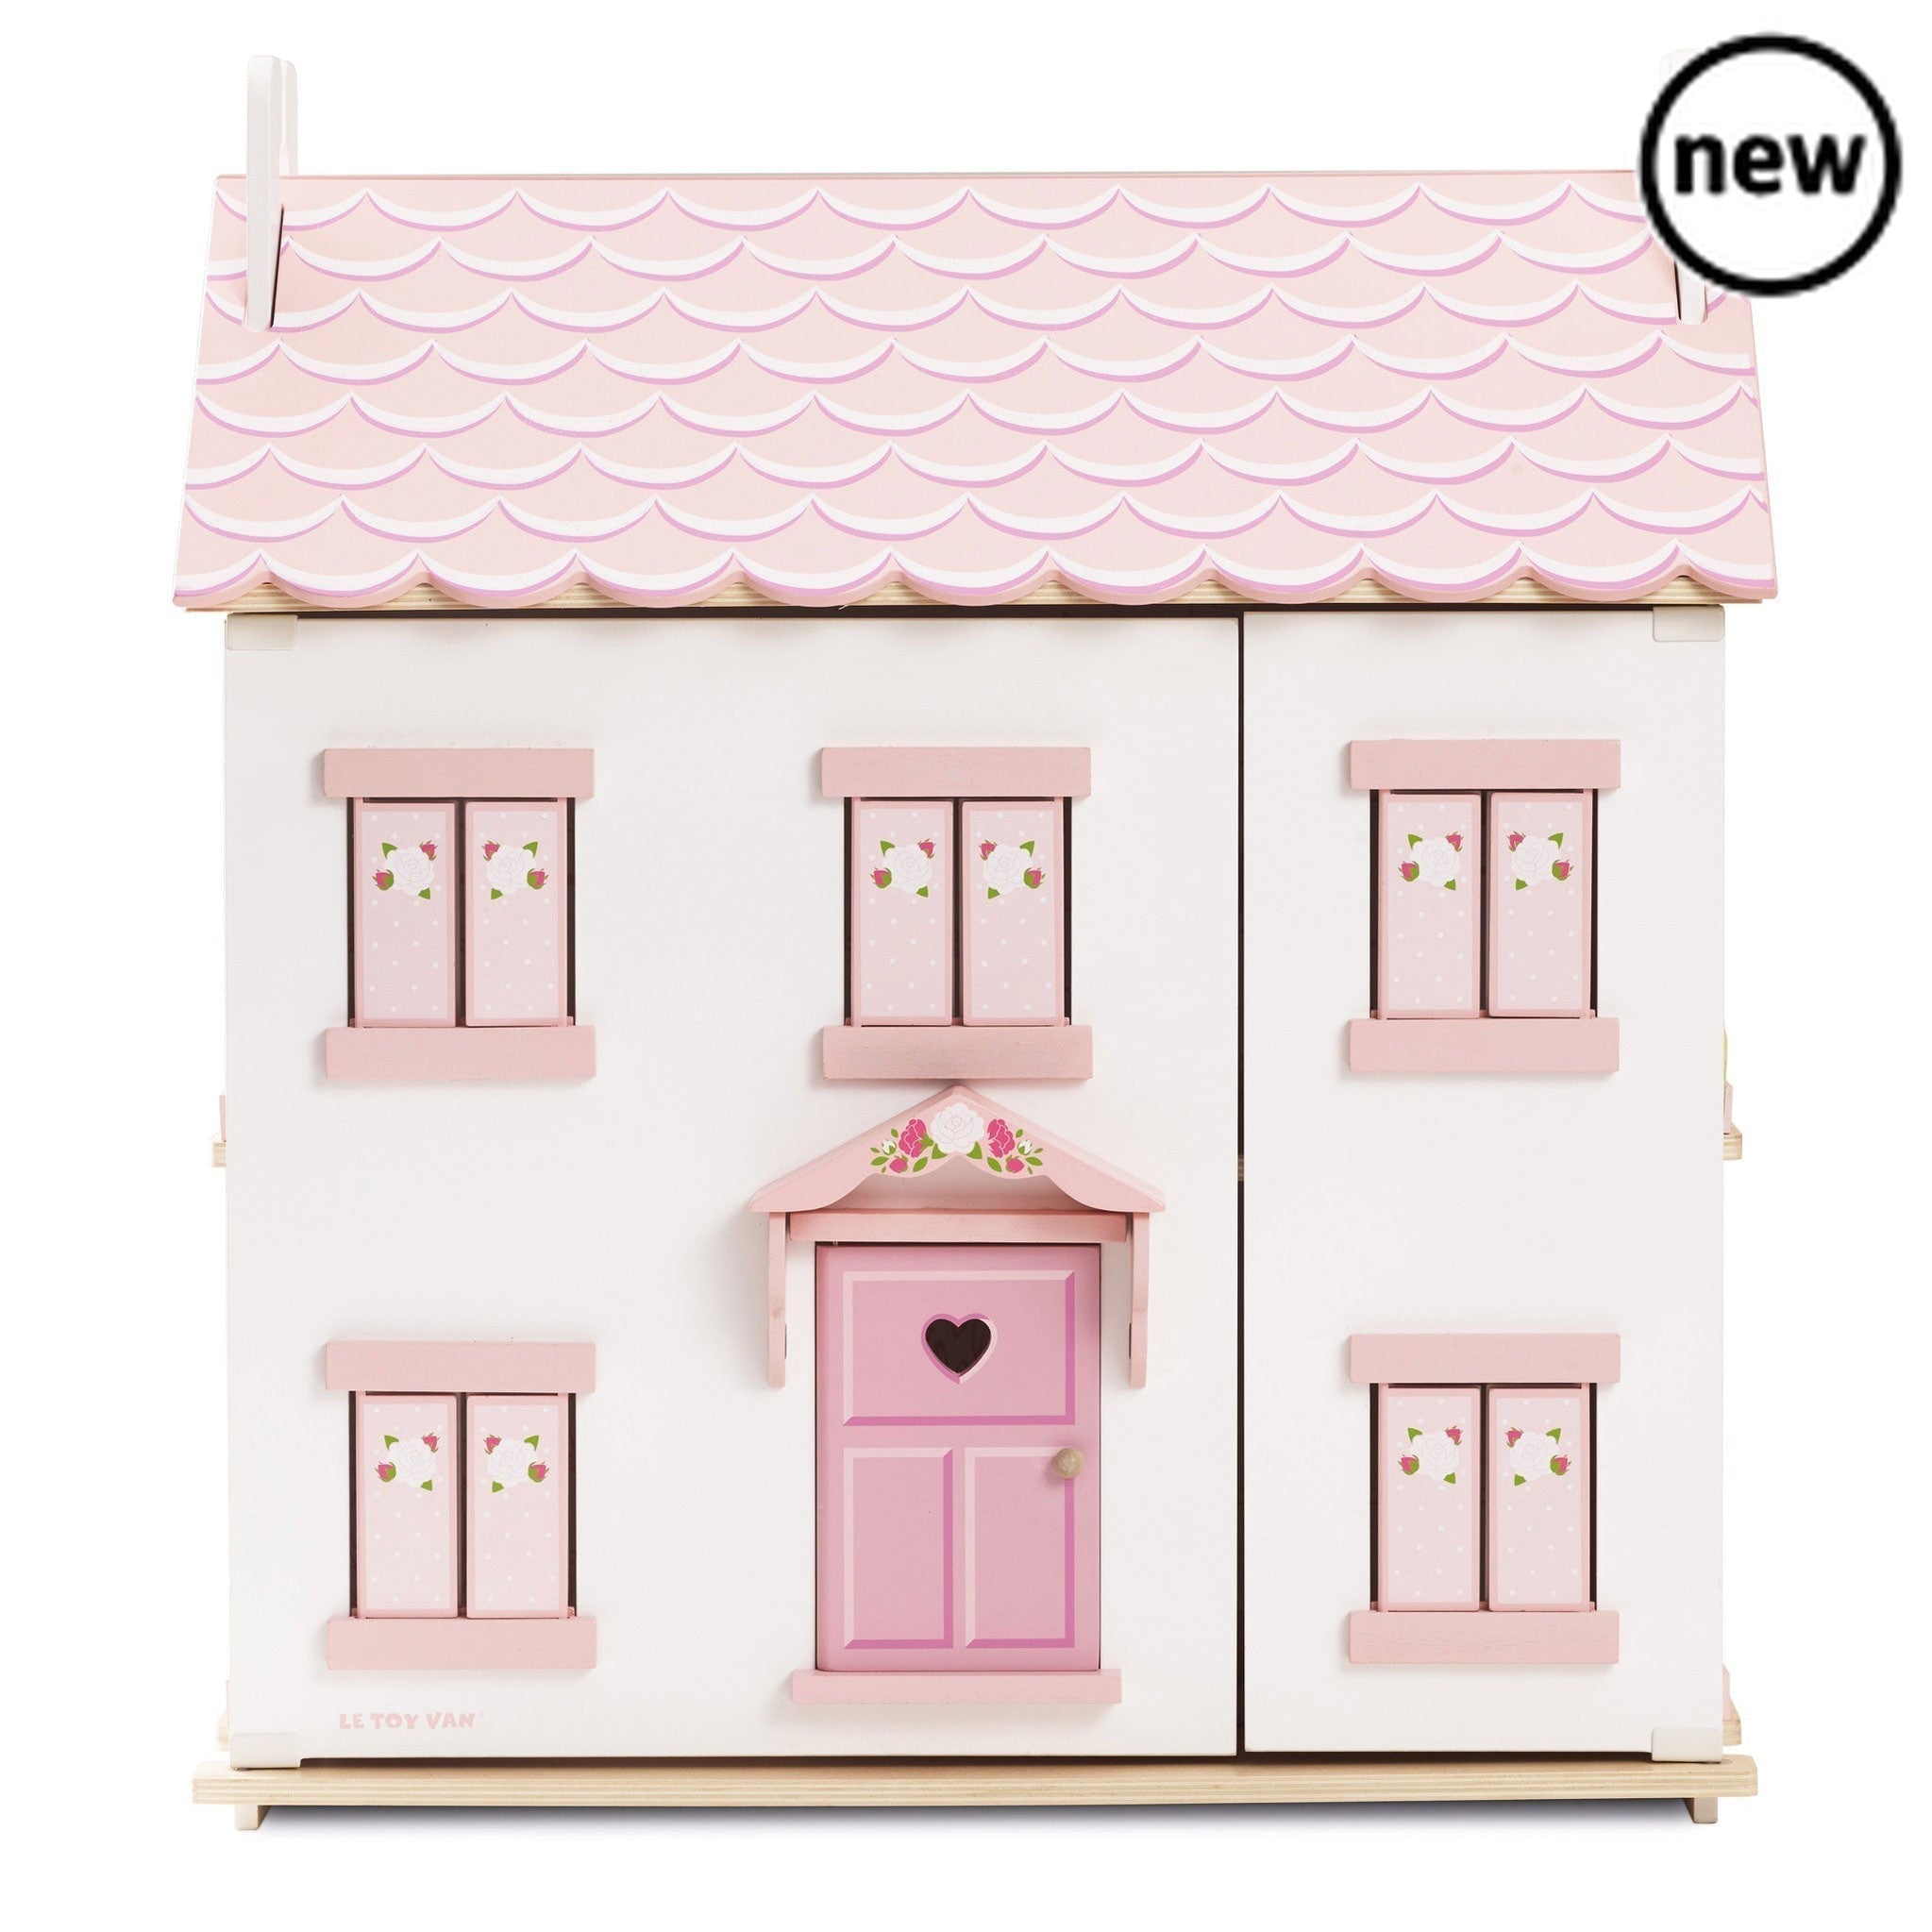 Sophie's Wooden Dolls House, Description Our much loved, multi award winning Sophie's Wooden Dolls House is a true classic. This delightful three storey miniature home features a timeless look with everything little learners could dream of. Full of nostalgic charm, this wonderful doll house is painted in the prettiest pastel pink and fresh whites, with opening and closing windows and shutters, each featuring a floral motif. The cute front porch makes a welcoming entrance for little guests. Brimming with the